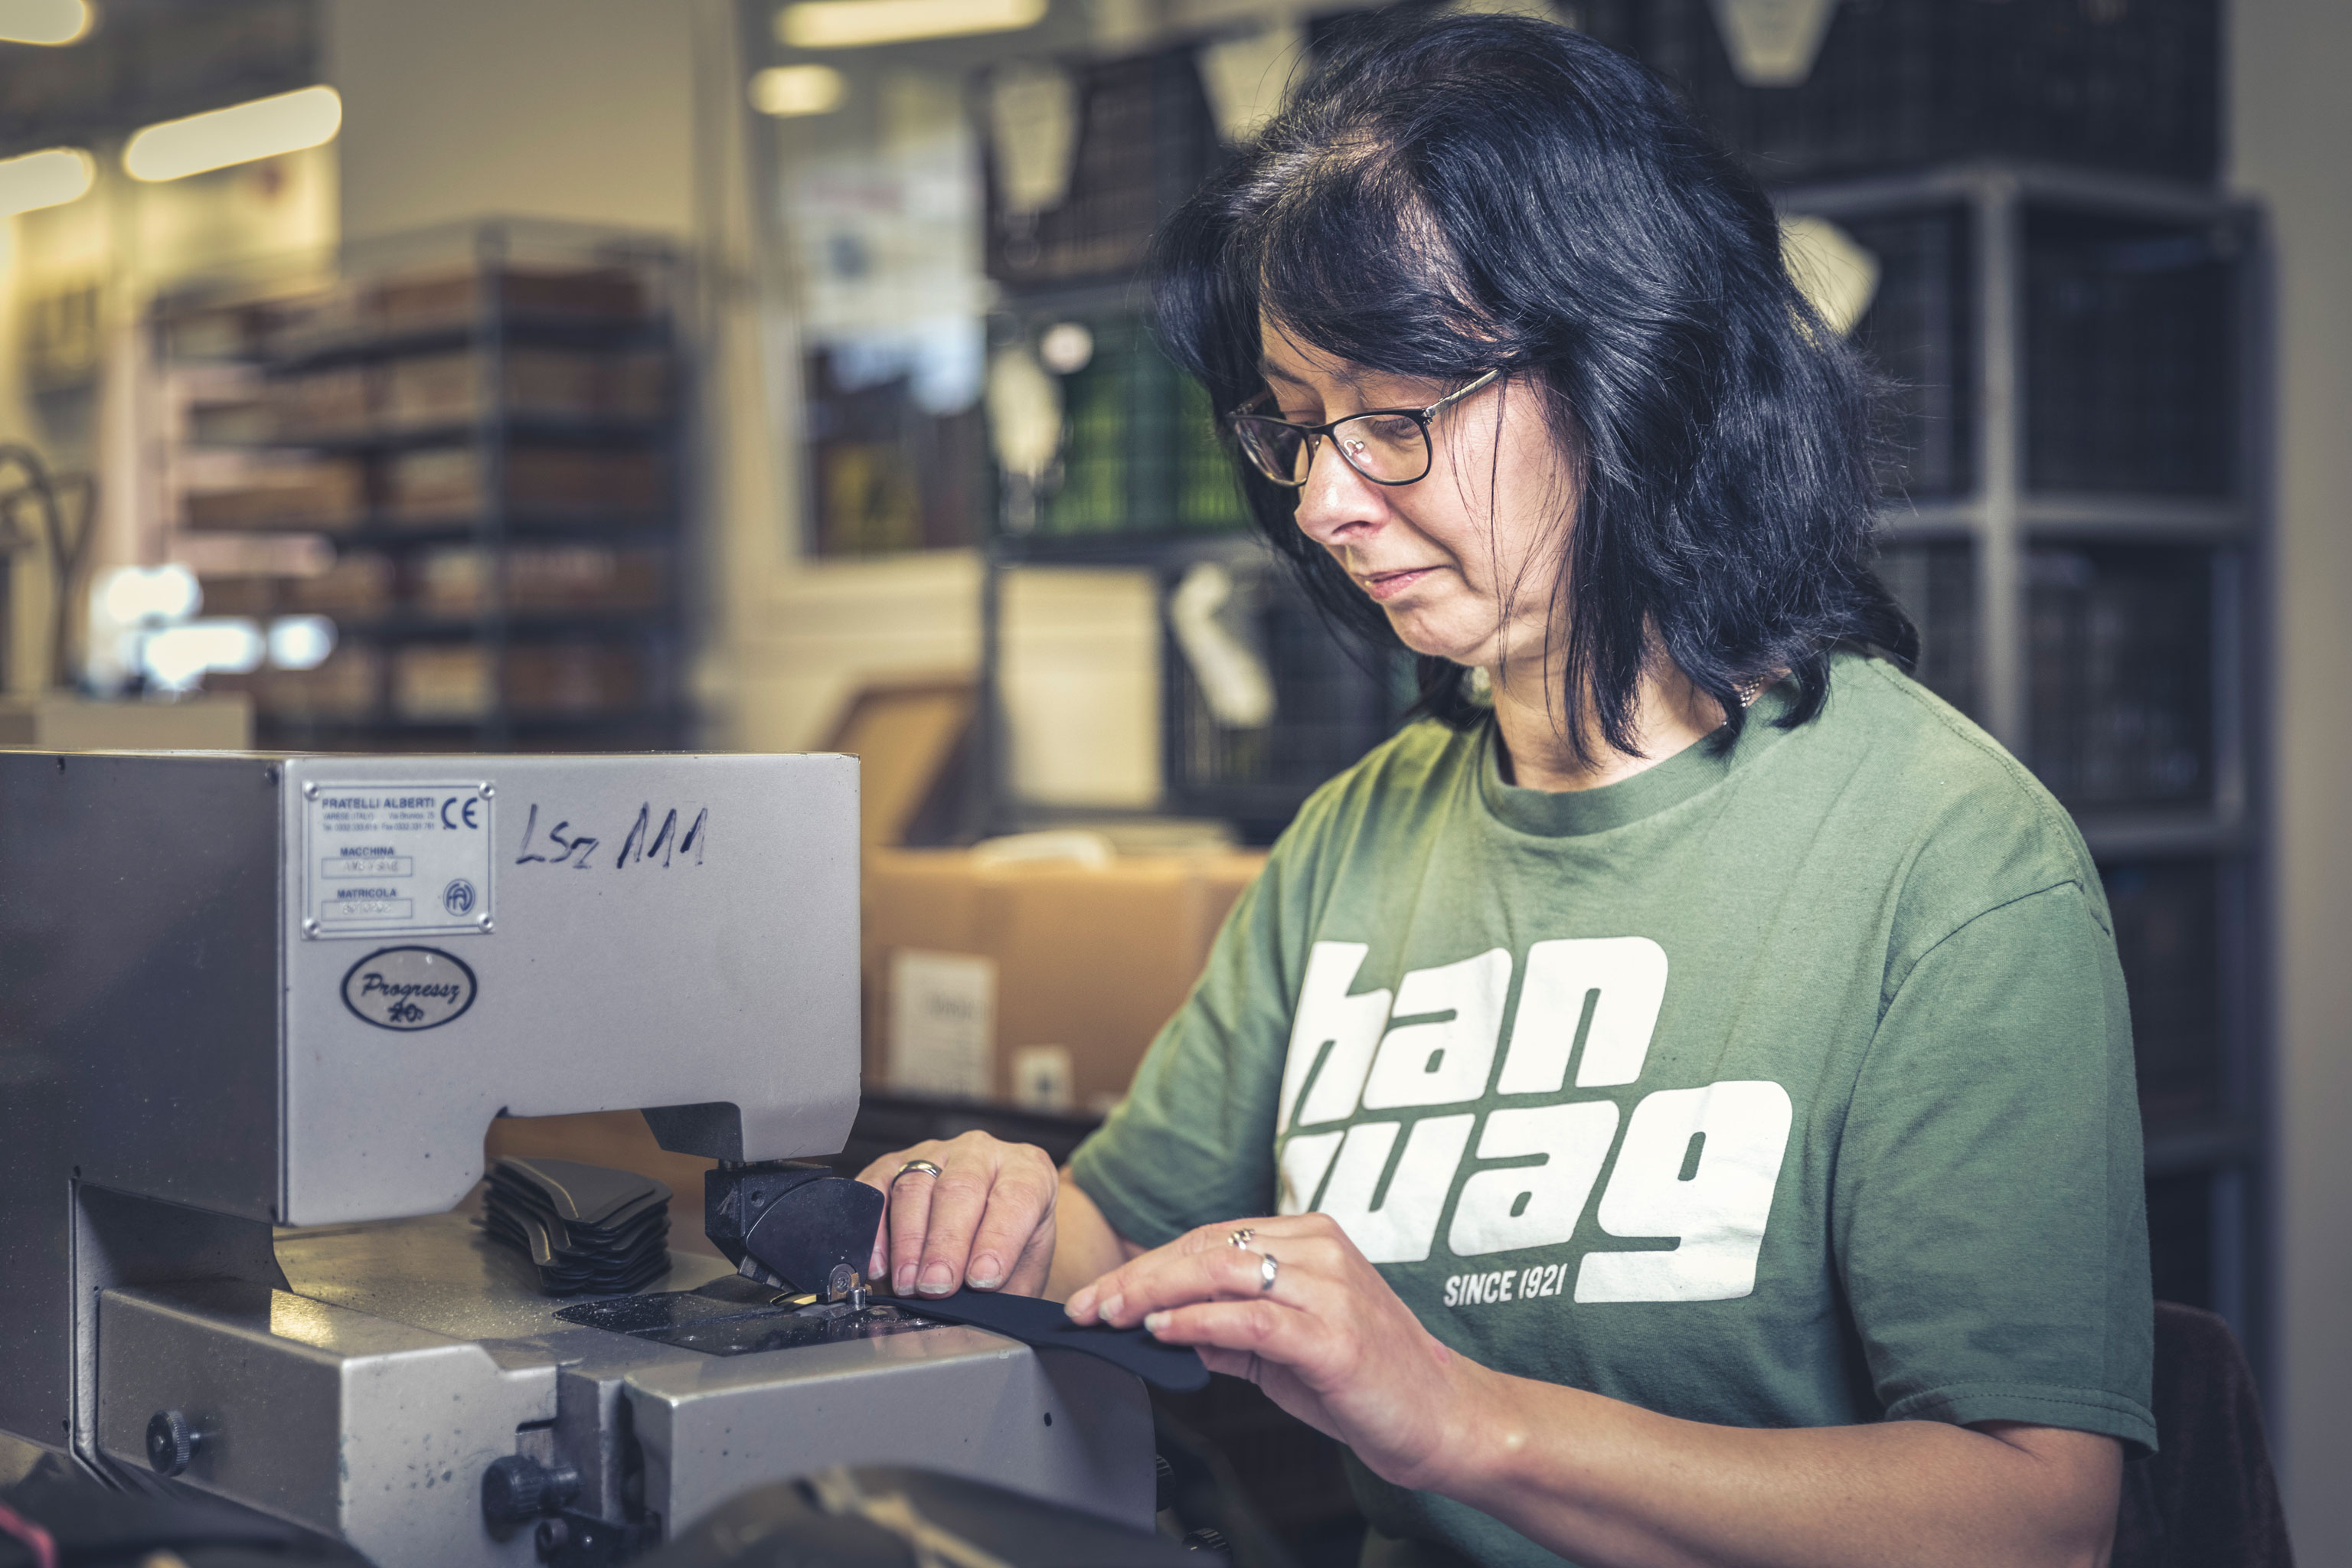 Andrea processes rubber pieces at the Hanwag good hiking boots production site in Hungary